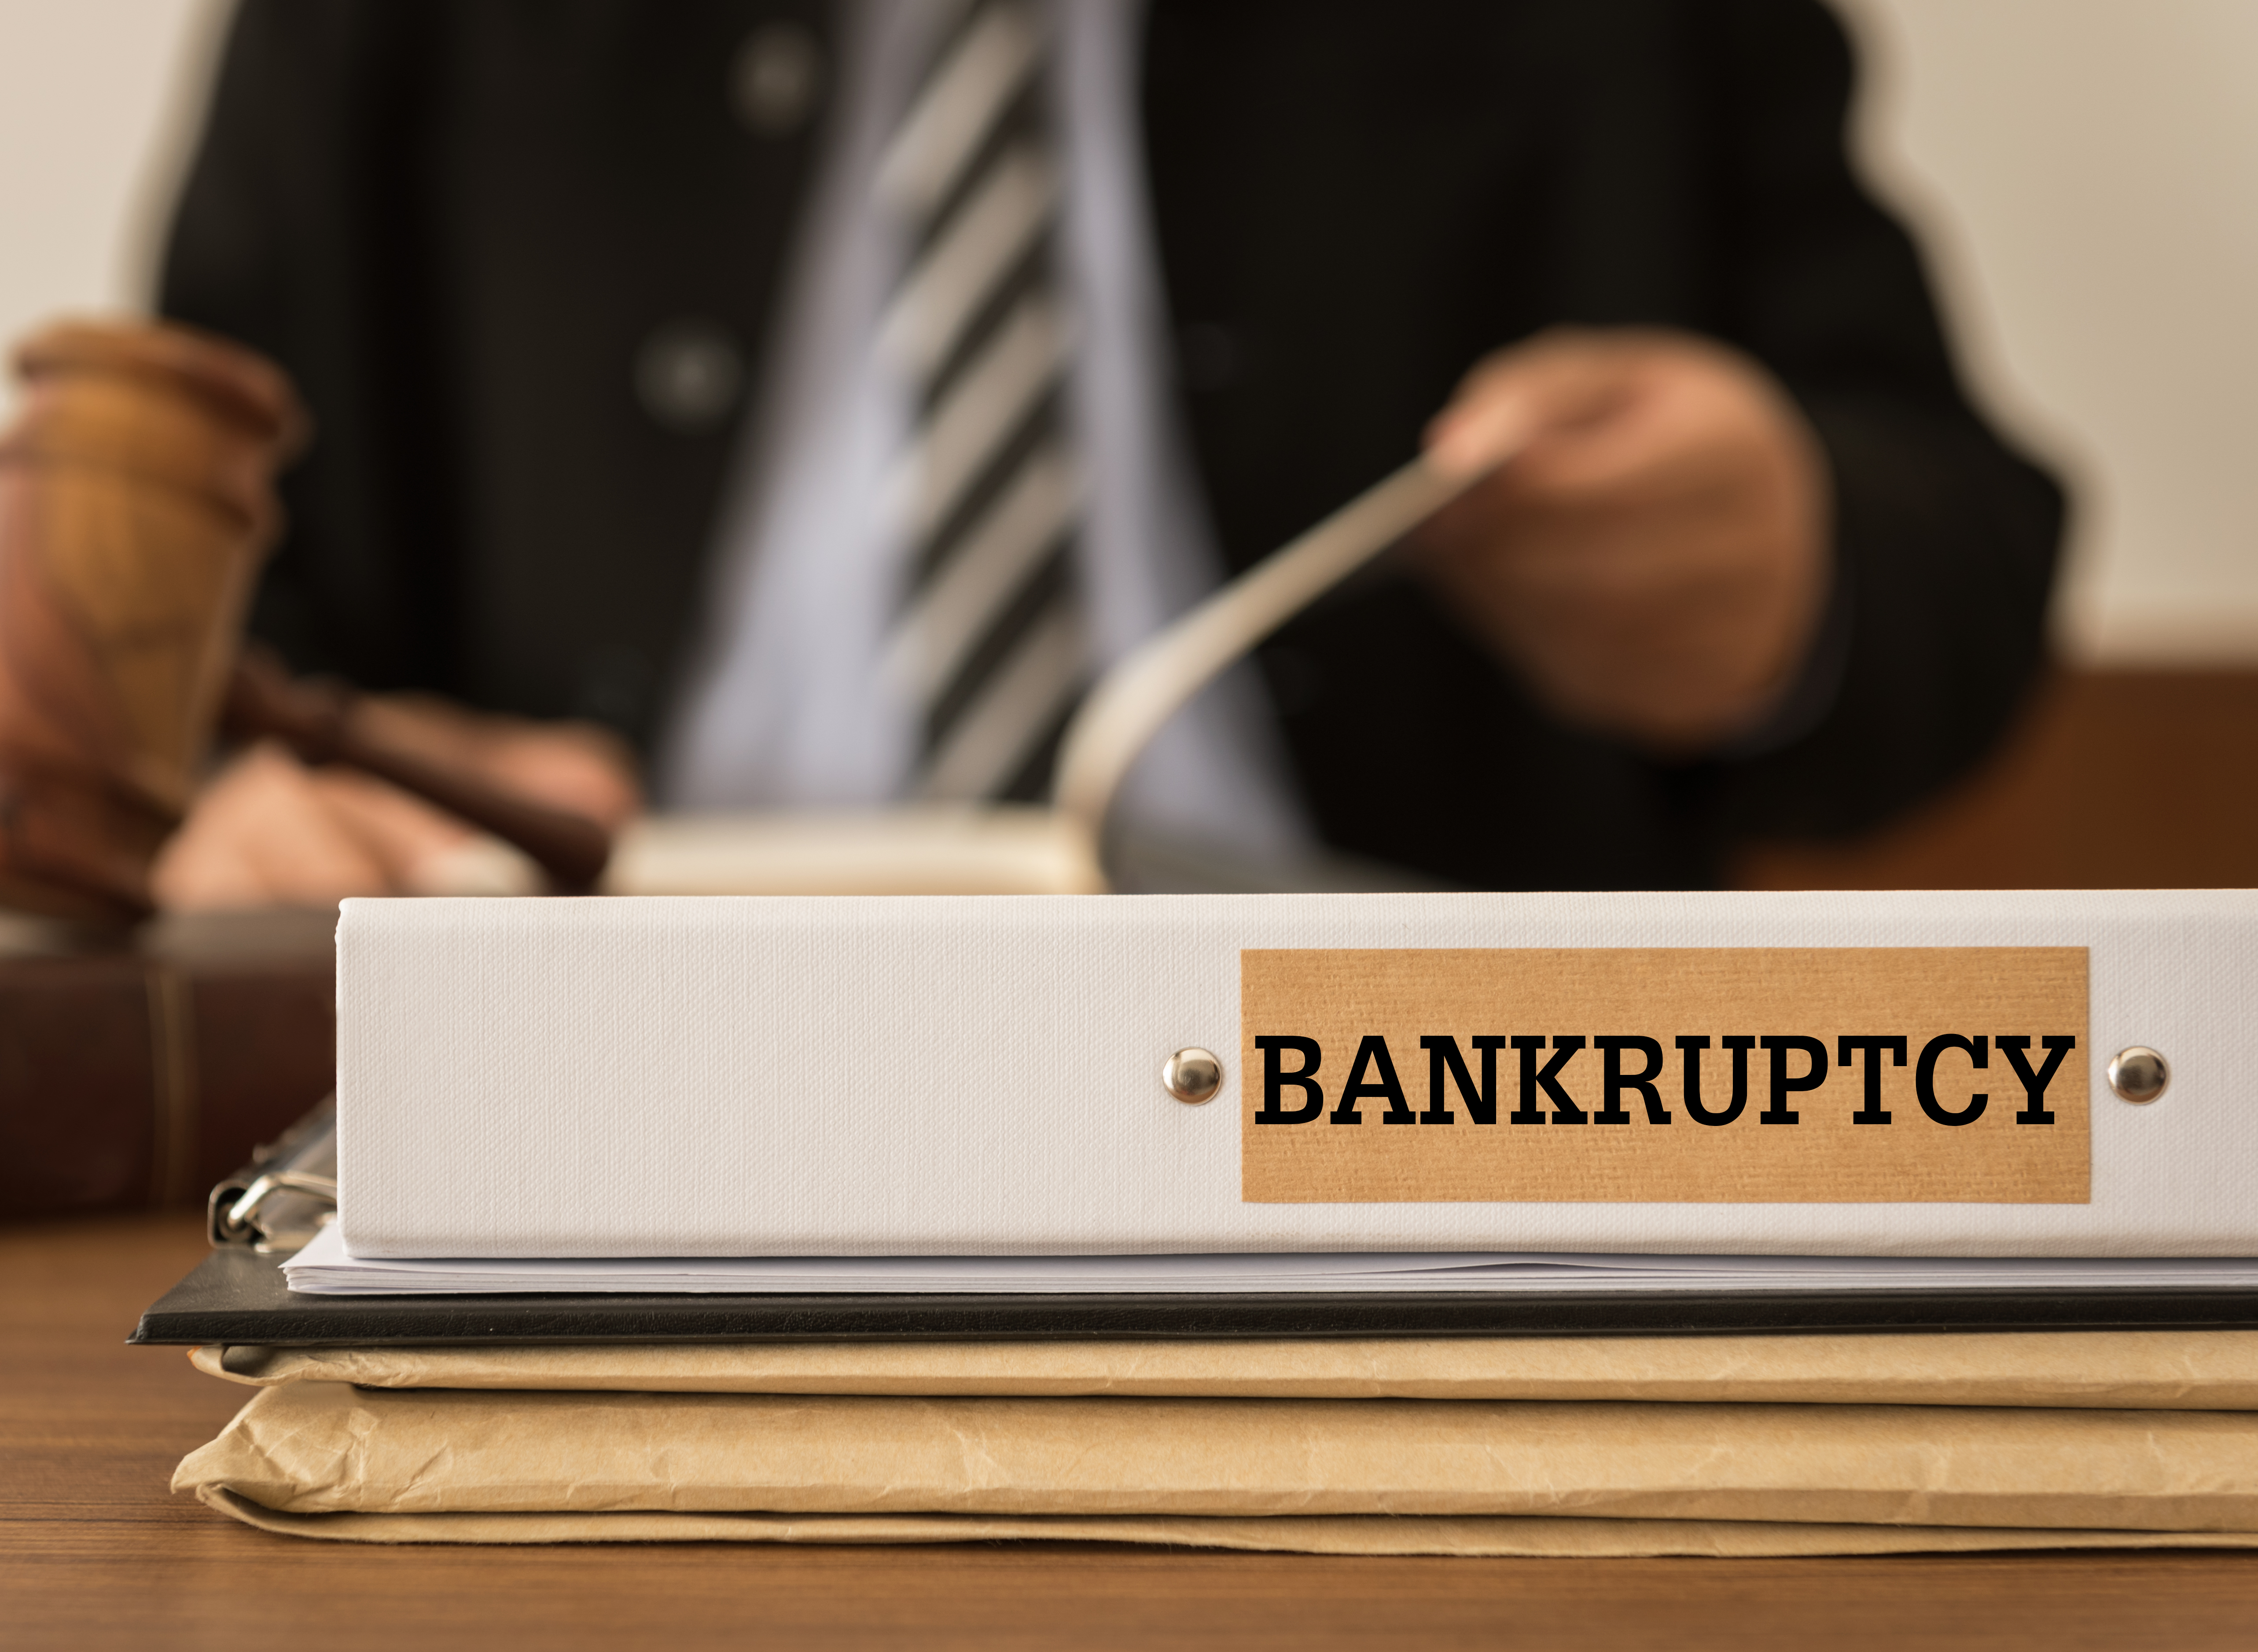 Price Law Group Chapter 7 and 13 Bankruptcy in Nevada 866-210-1722